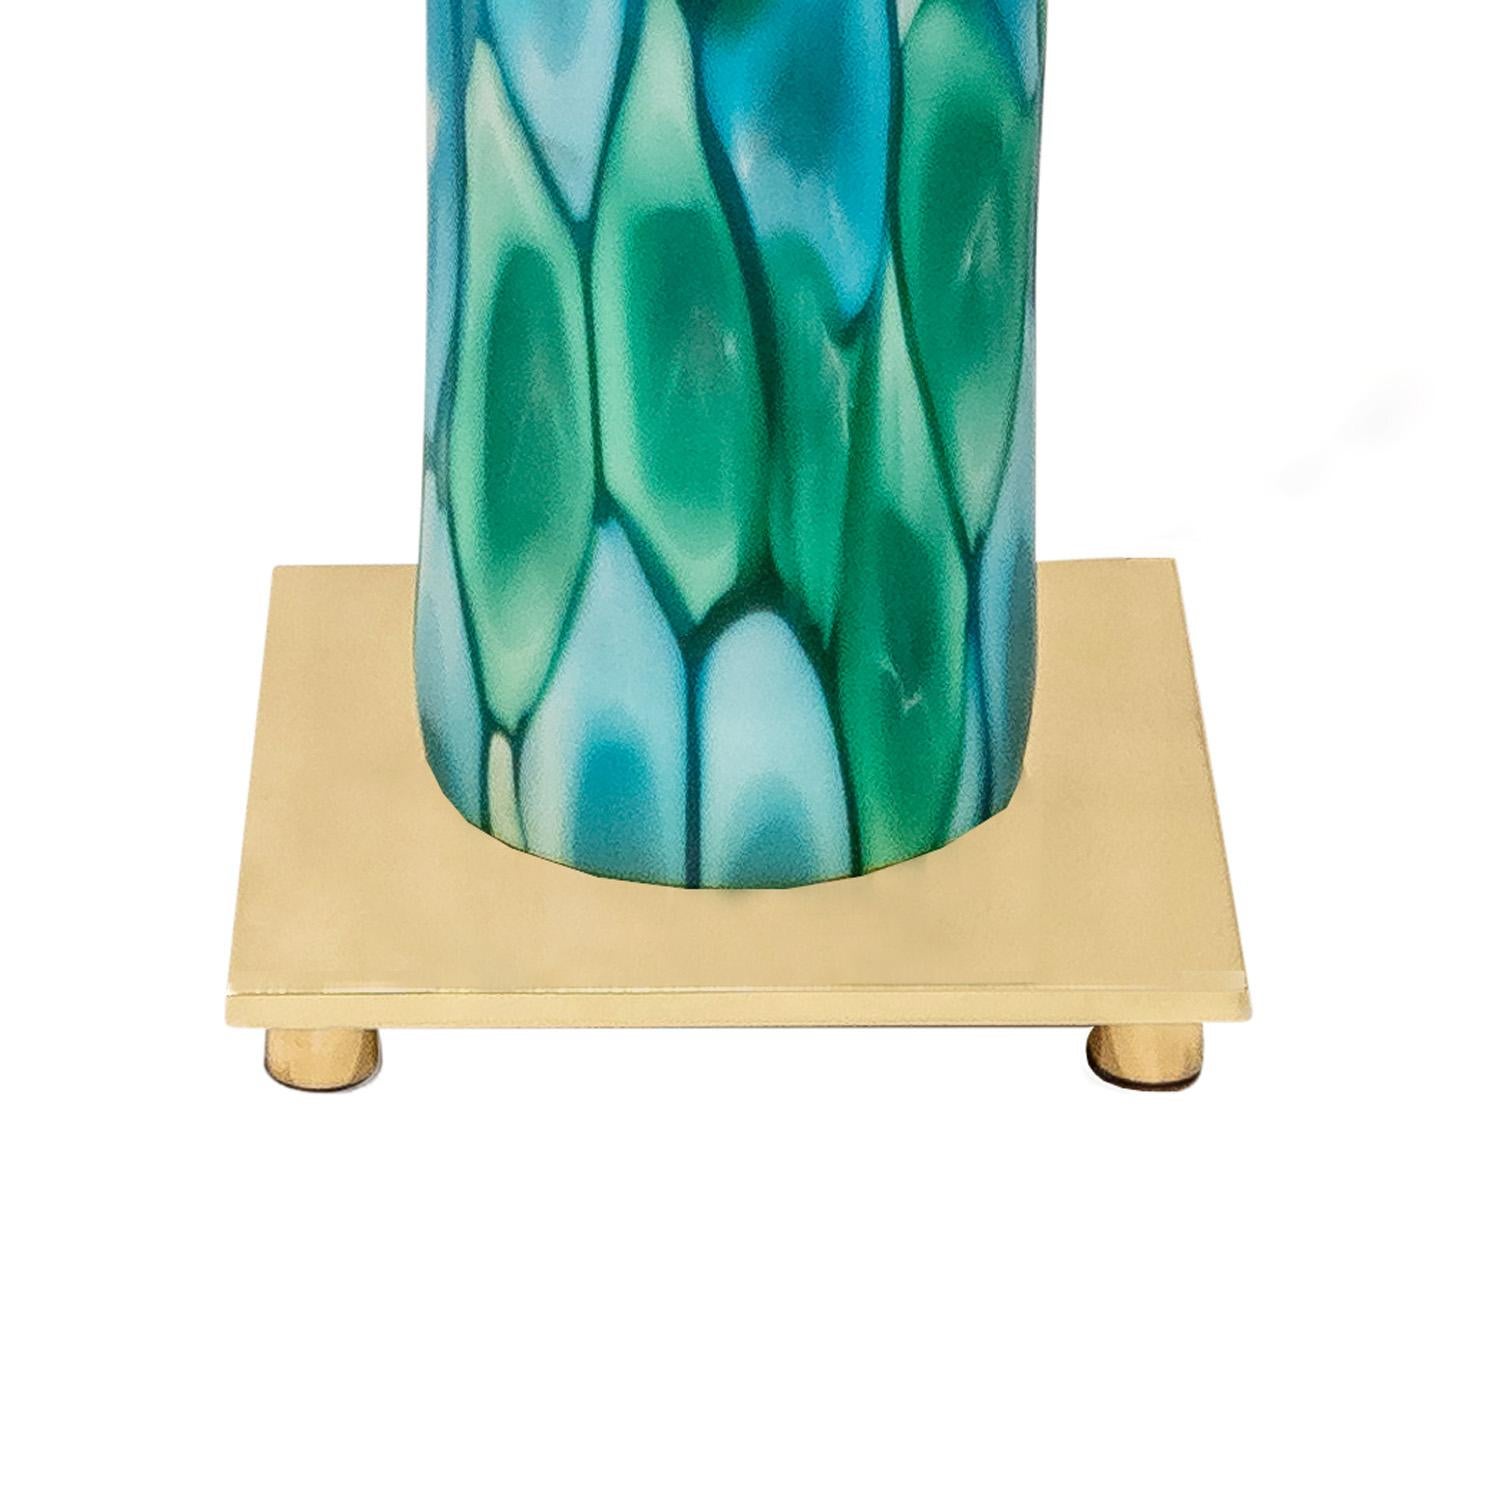 Hand-Crafted Fratelli Toso Art Glass Table Lamp with Green and Blue Murrhines, 1959 For Sale